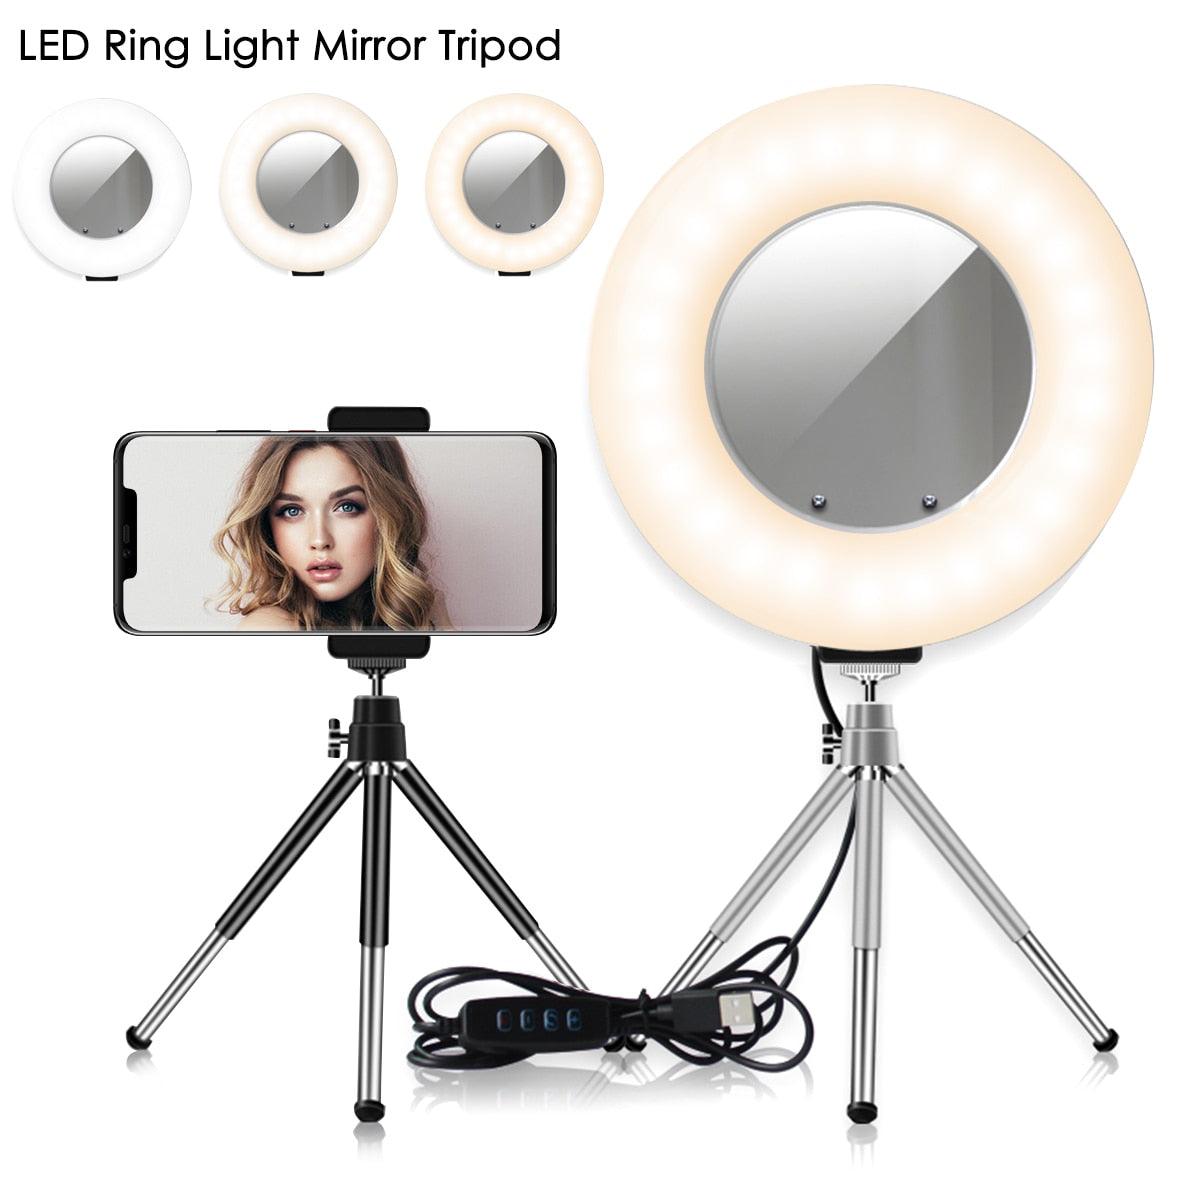 4 In 1 Dimmable LED Ring Light Table Top 5W USB Charging With Mirror Tripod Stand Cell Phone Holder For Live Studio Makeup (RS)(1U50)